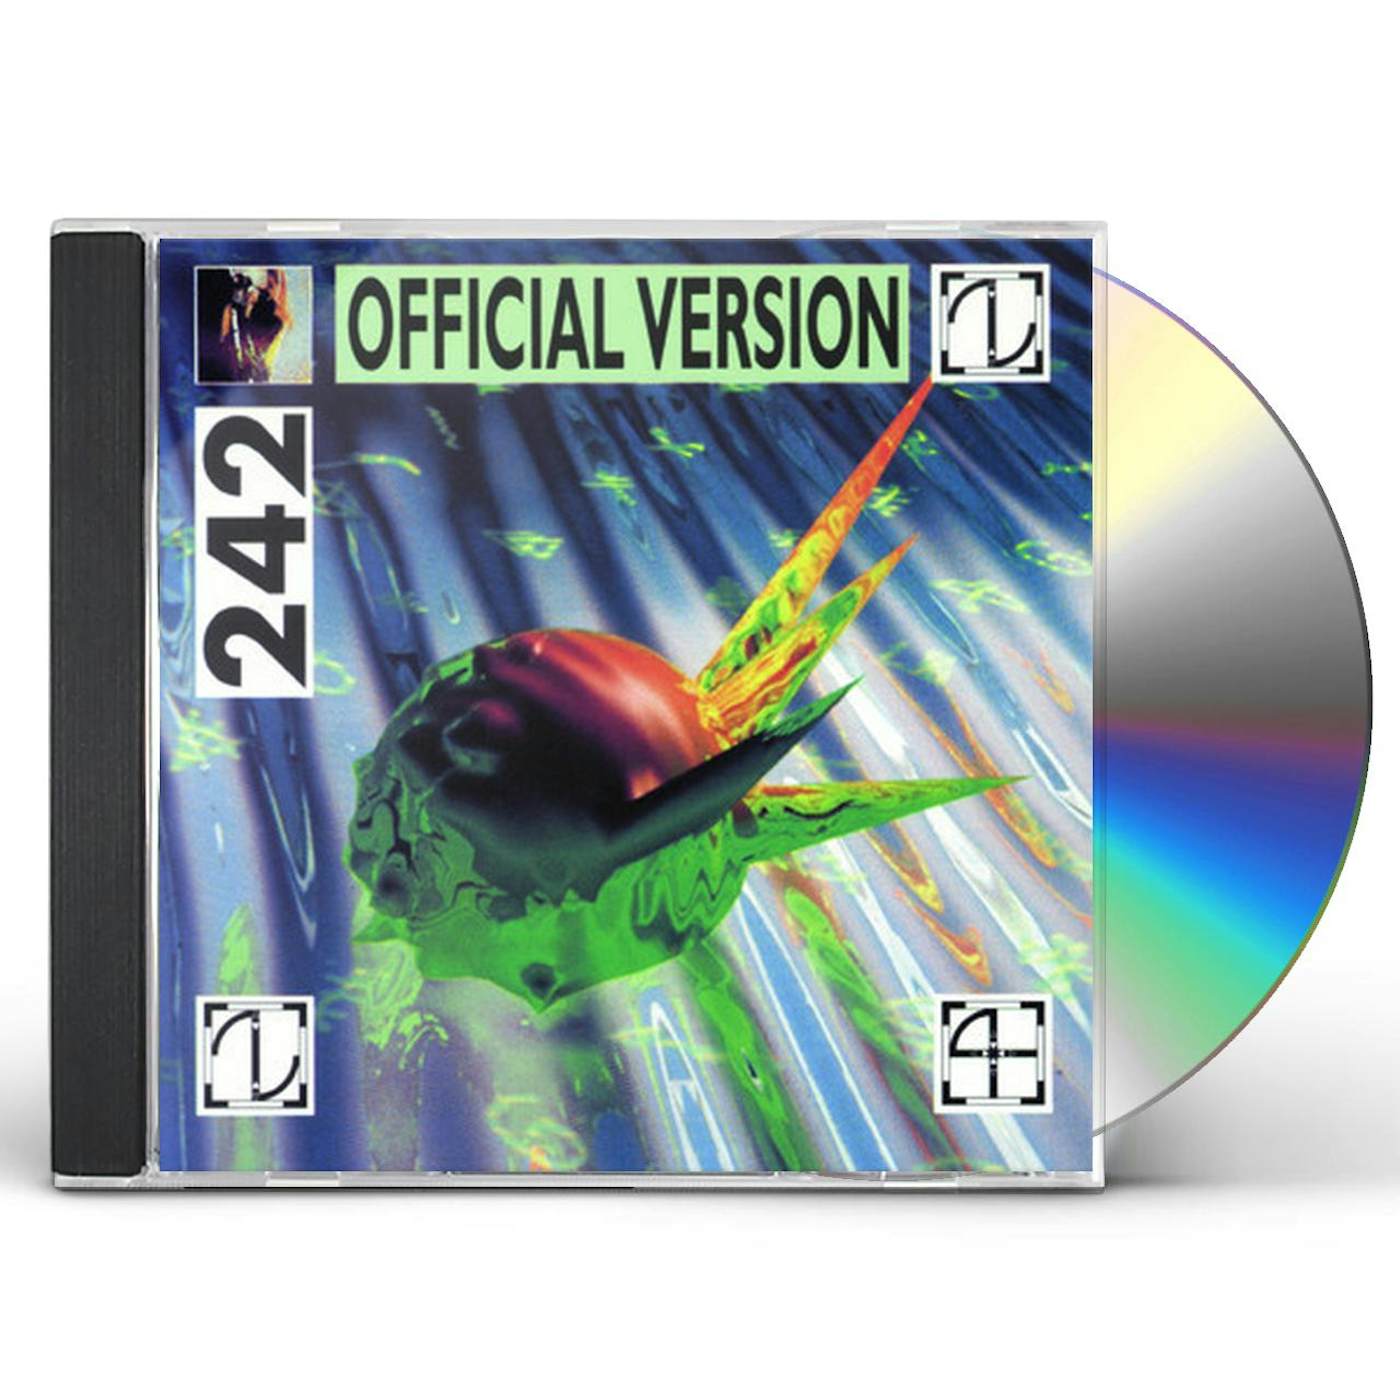 Front 242 OFFICIAL VERSION CD